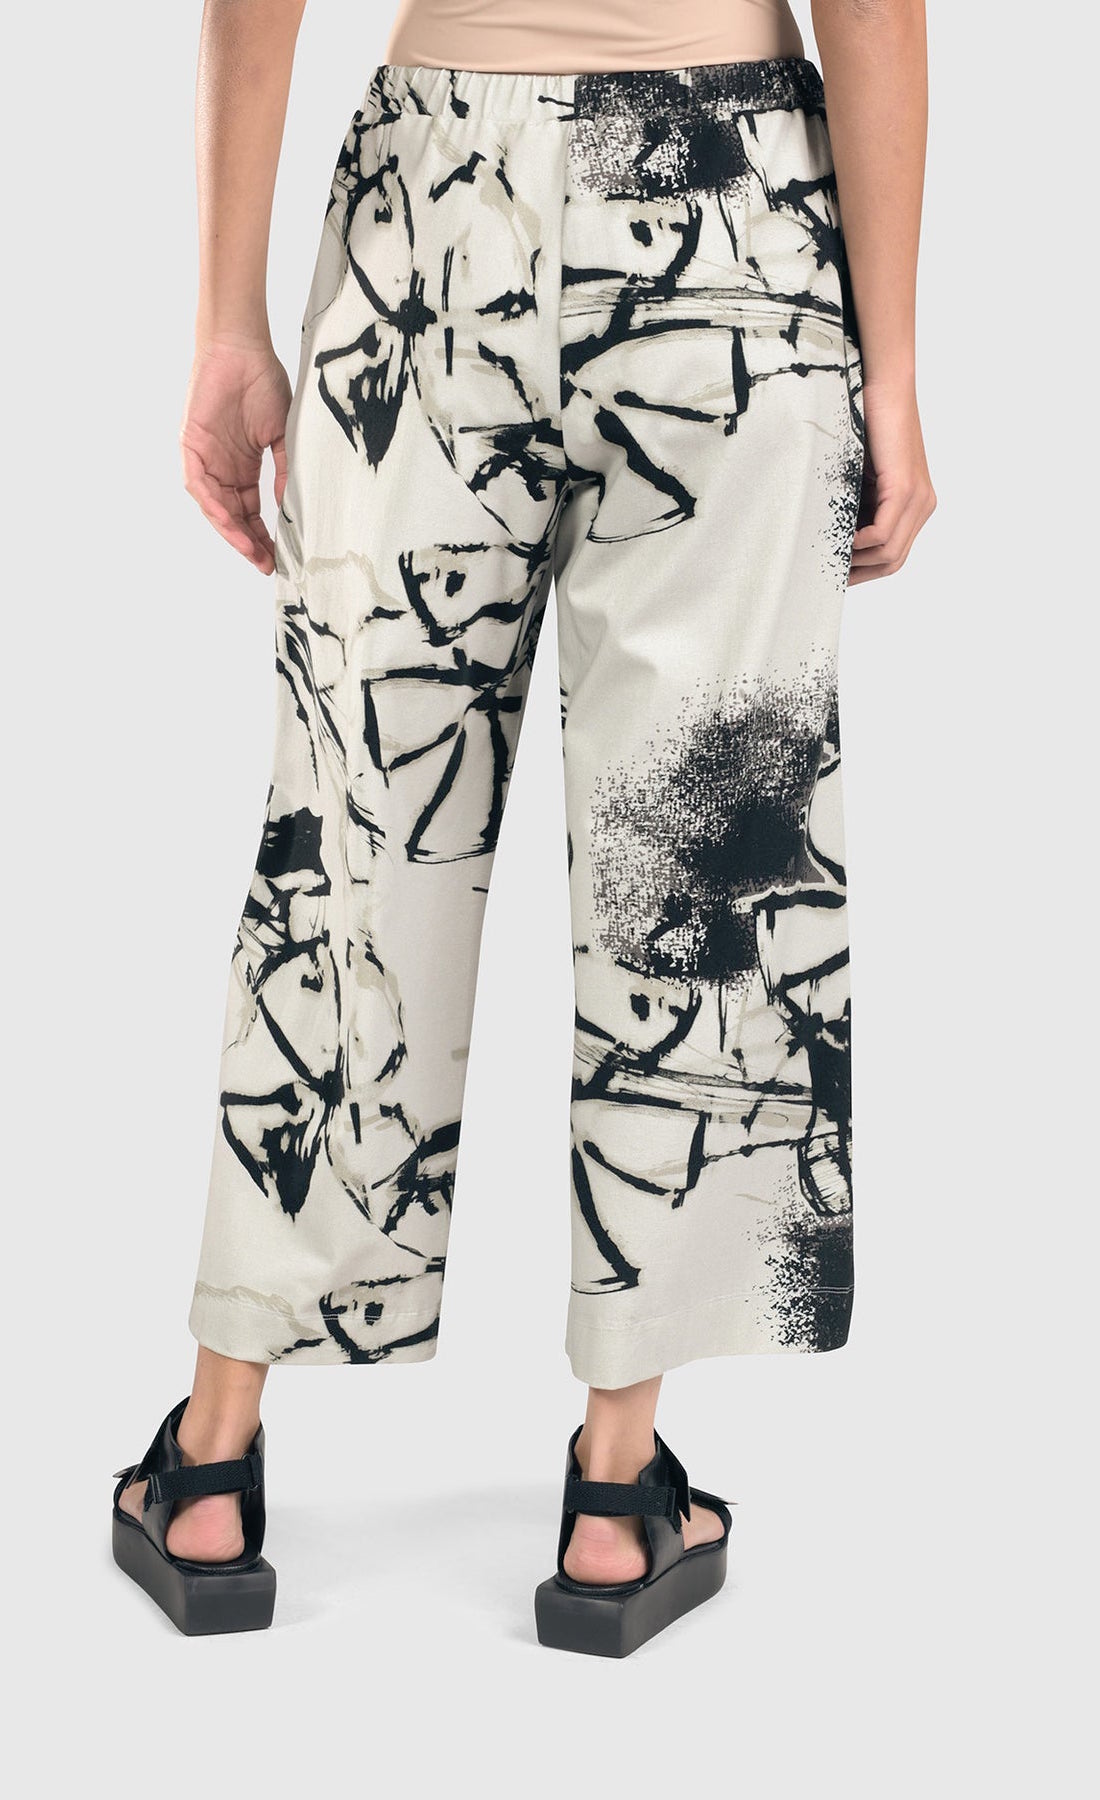 Back bottom half view of a woman wearing the alembika urban sketch go to pant. This pant is grey white with black and dark grey scribbles all over it. The pant has a cropped cut, and wide legs.